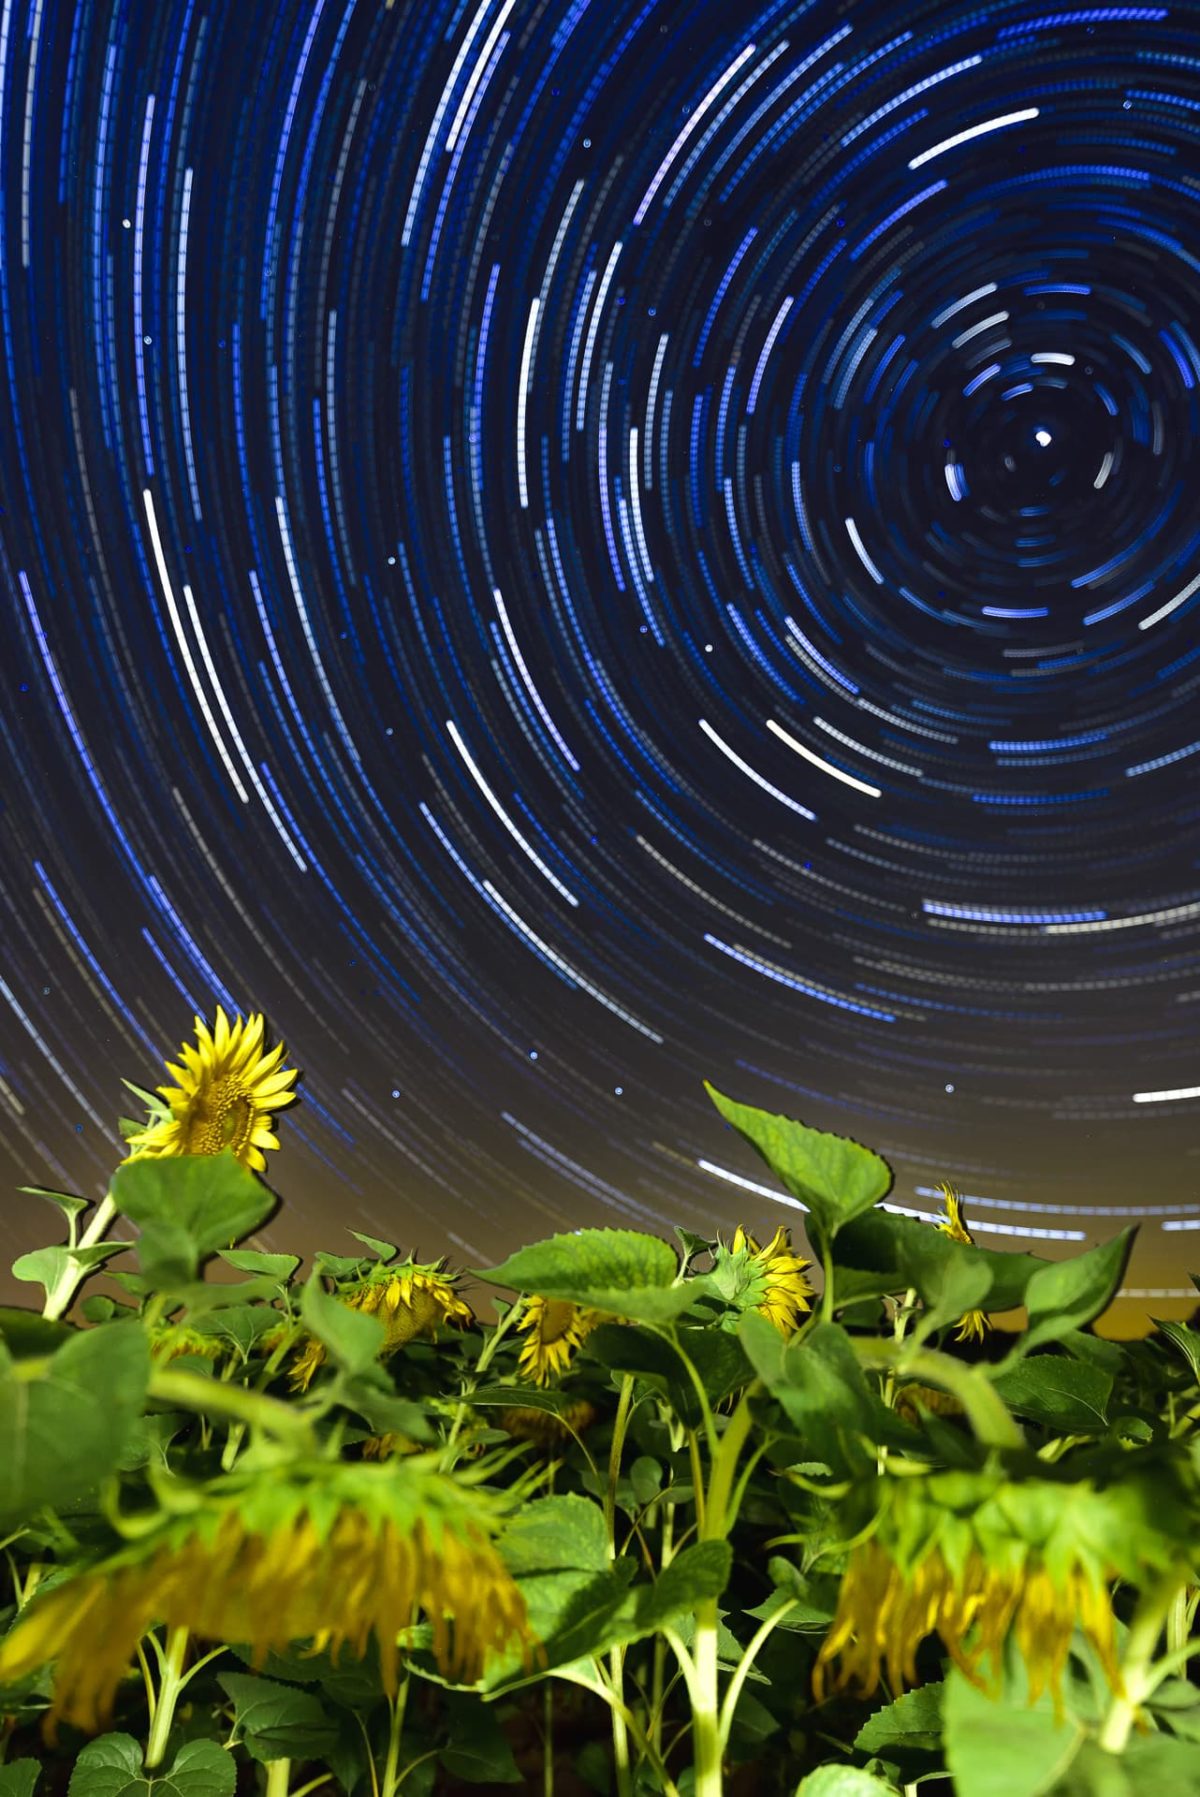 Star trails over sunflowers field